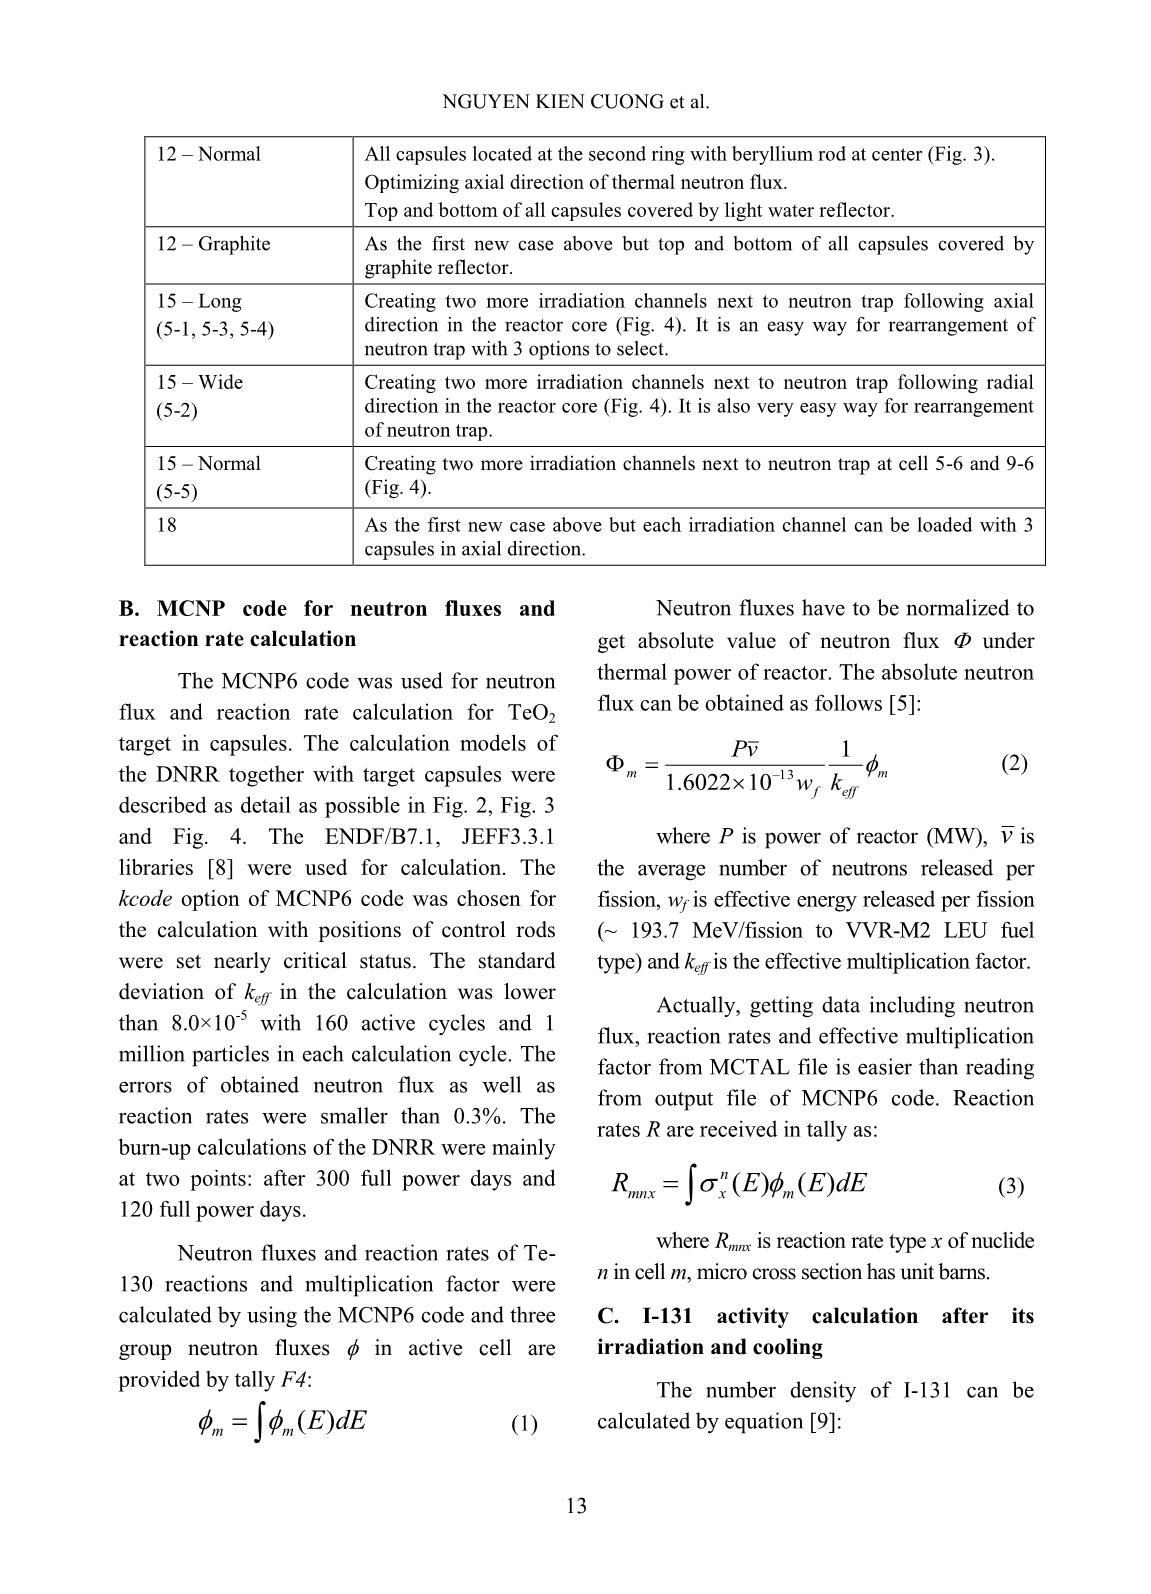 Calculation results for enhancing ability of I-131 radioisotope production using tellurium dioxide target on the dalat nuclear research reactor trang 5